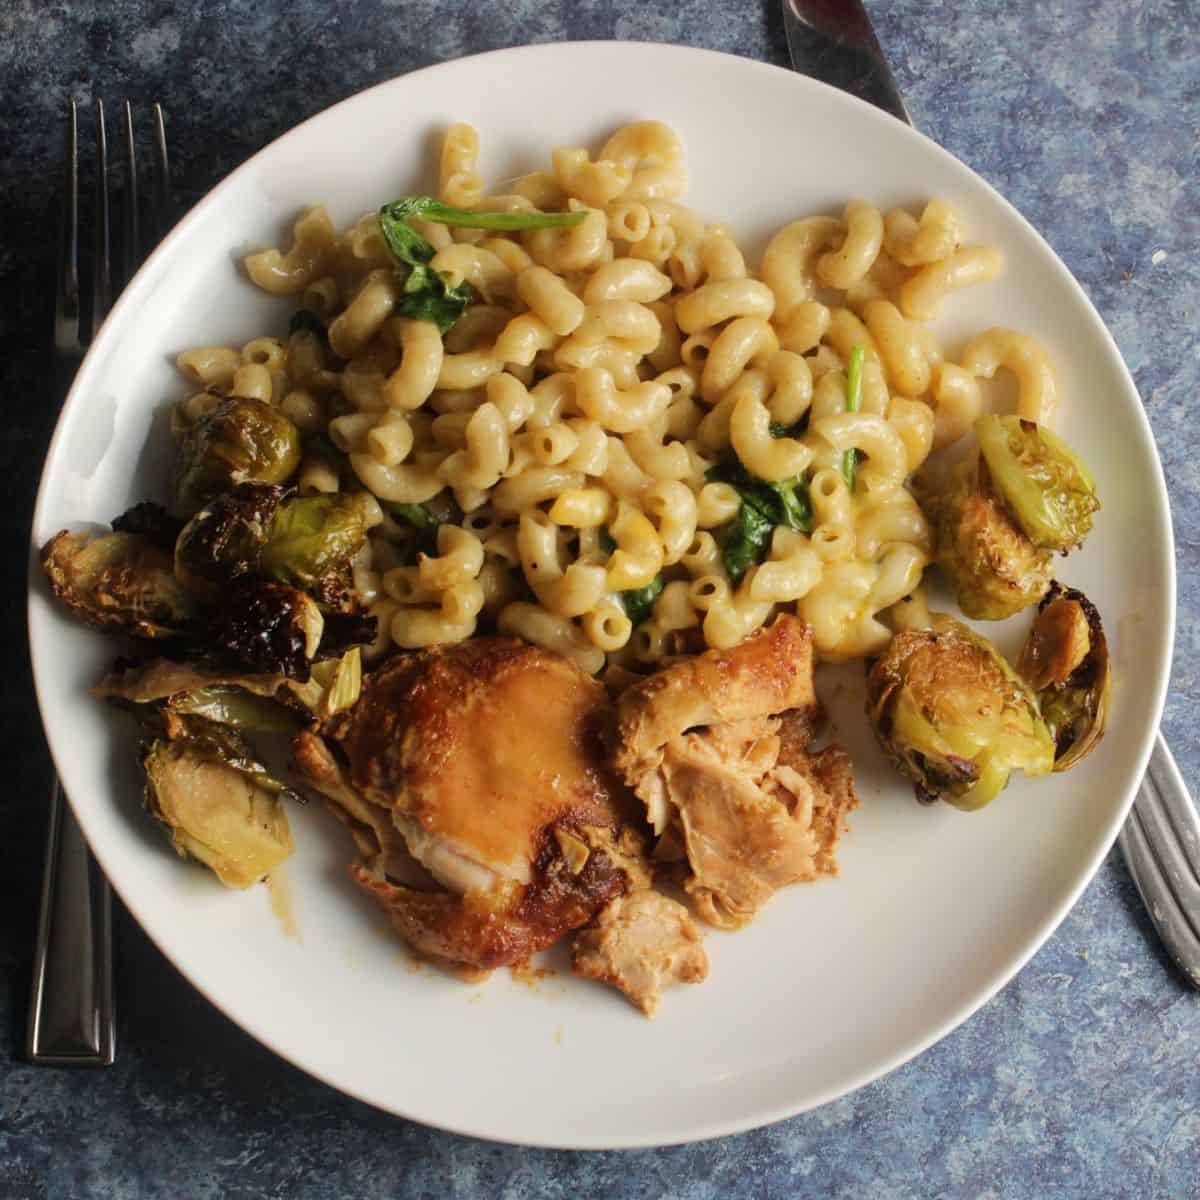 slow cooker BBQ chicken thighs served with pasta and Brussels sprouts.